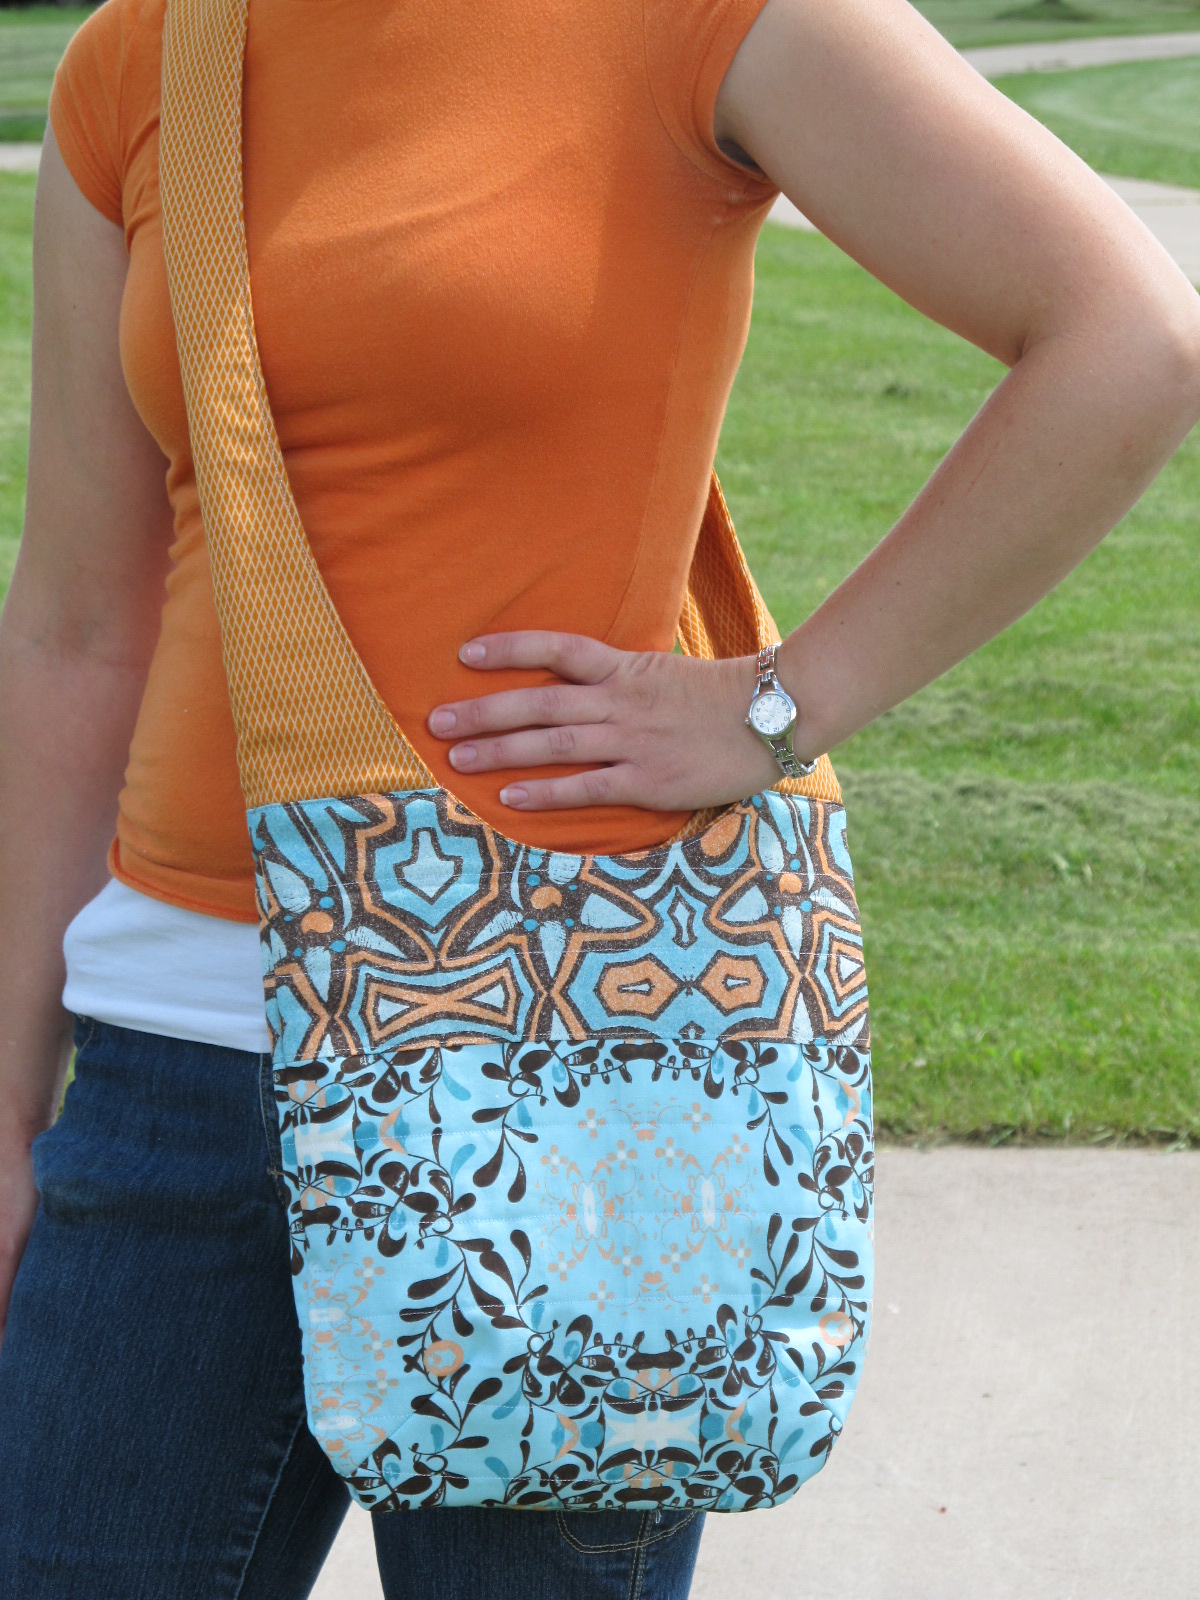 Modern Cottage Creations: Mail Sack Bags!